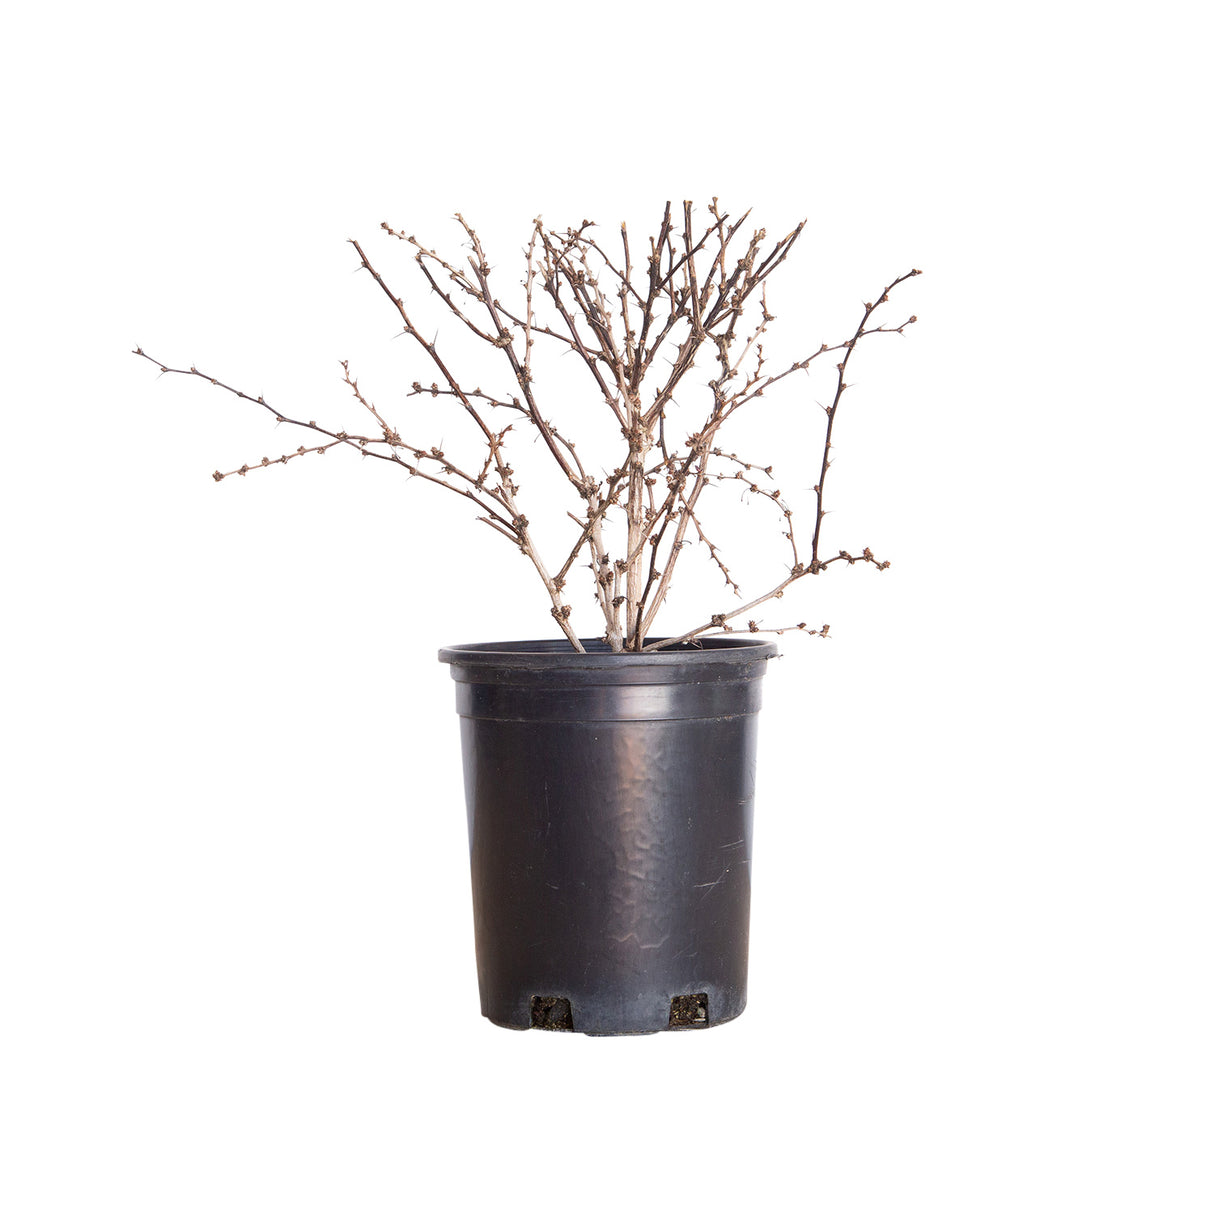 2.5 Quart Rose glow Barberry dormant in black container.